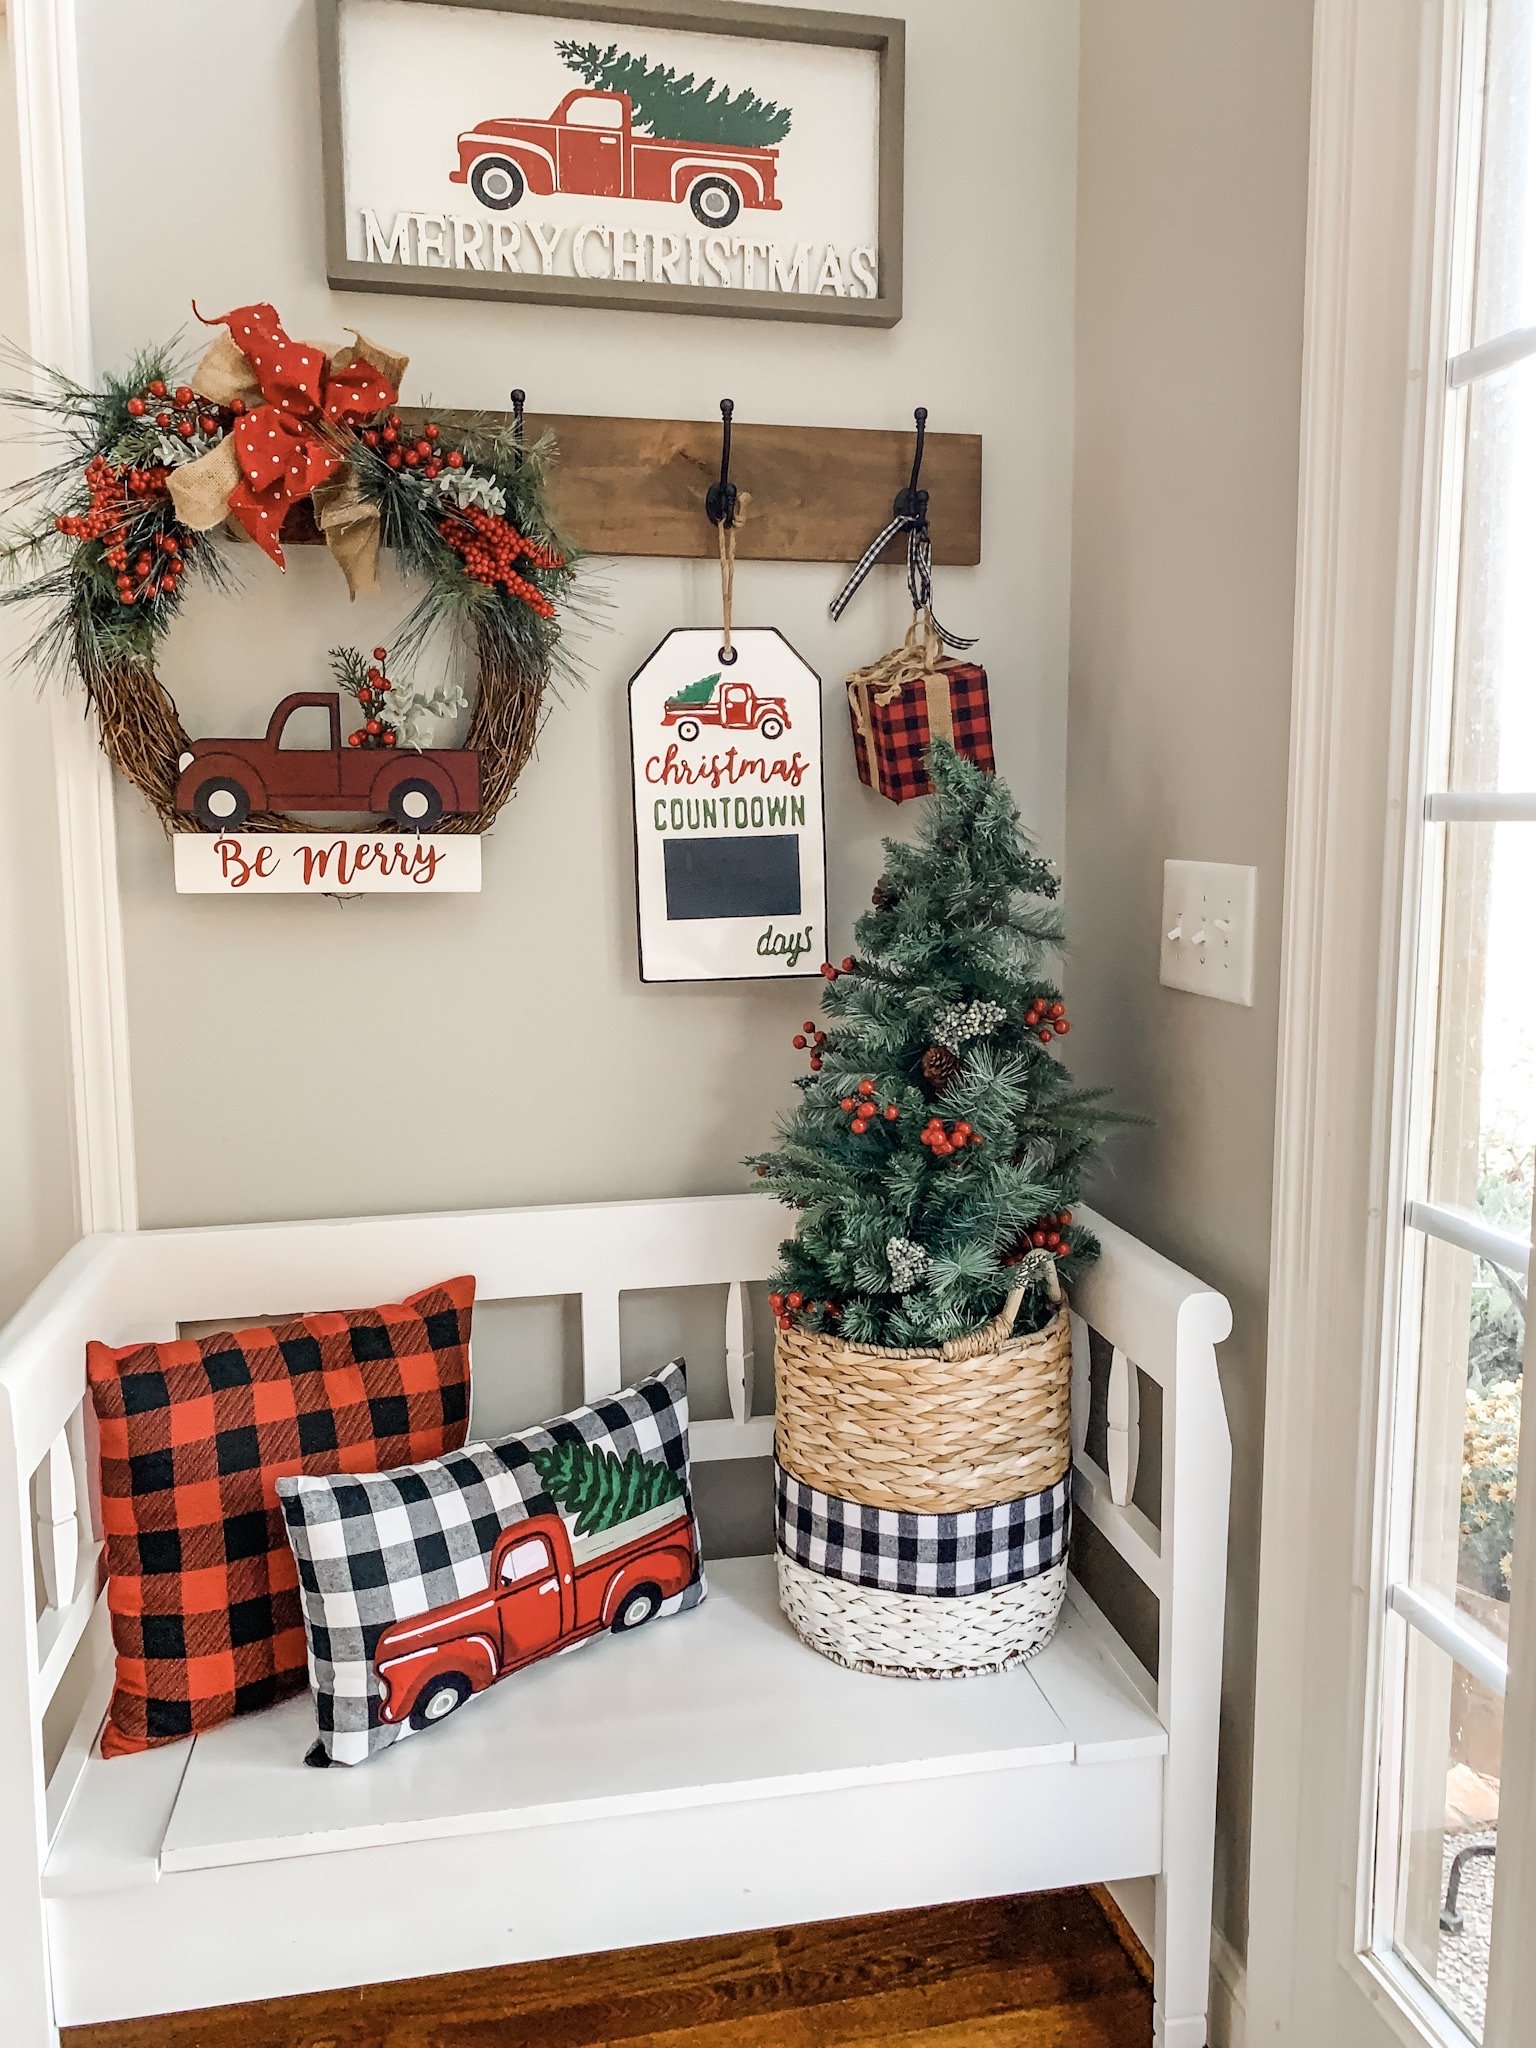 Christmas truck decor in my entry way! 